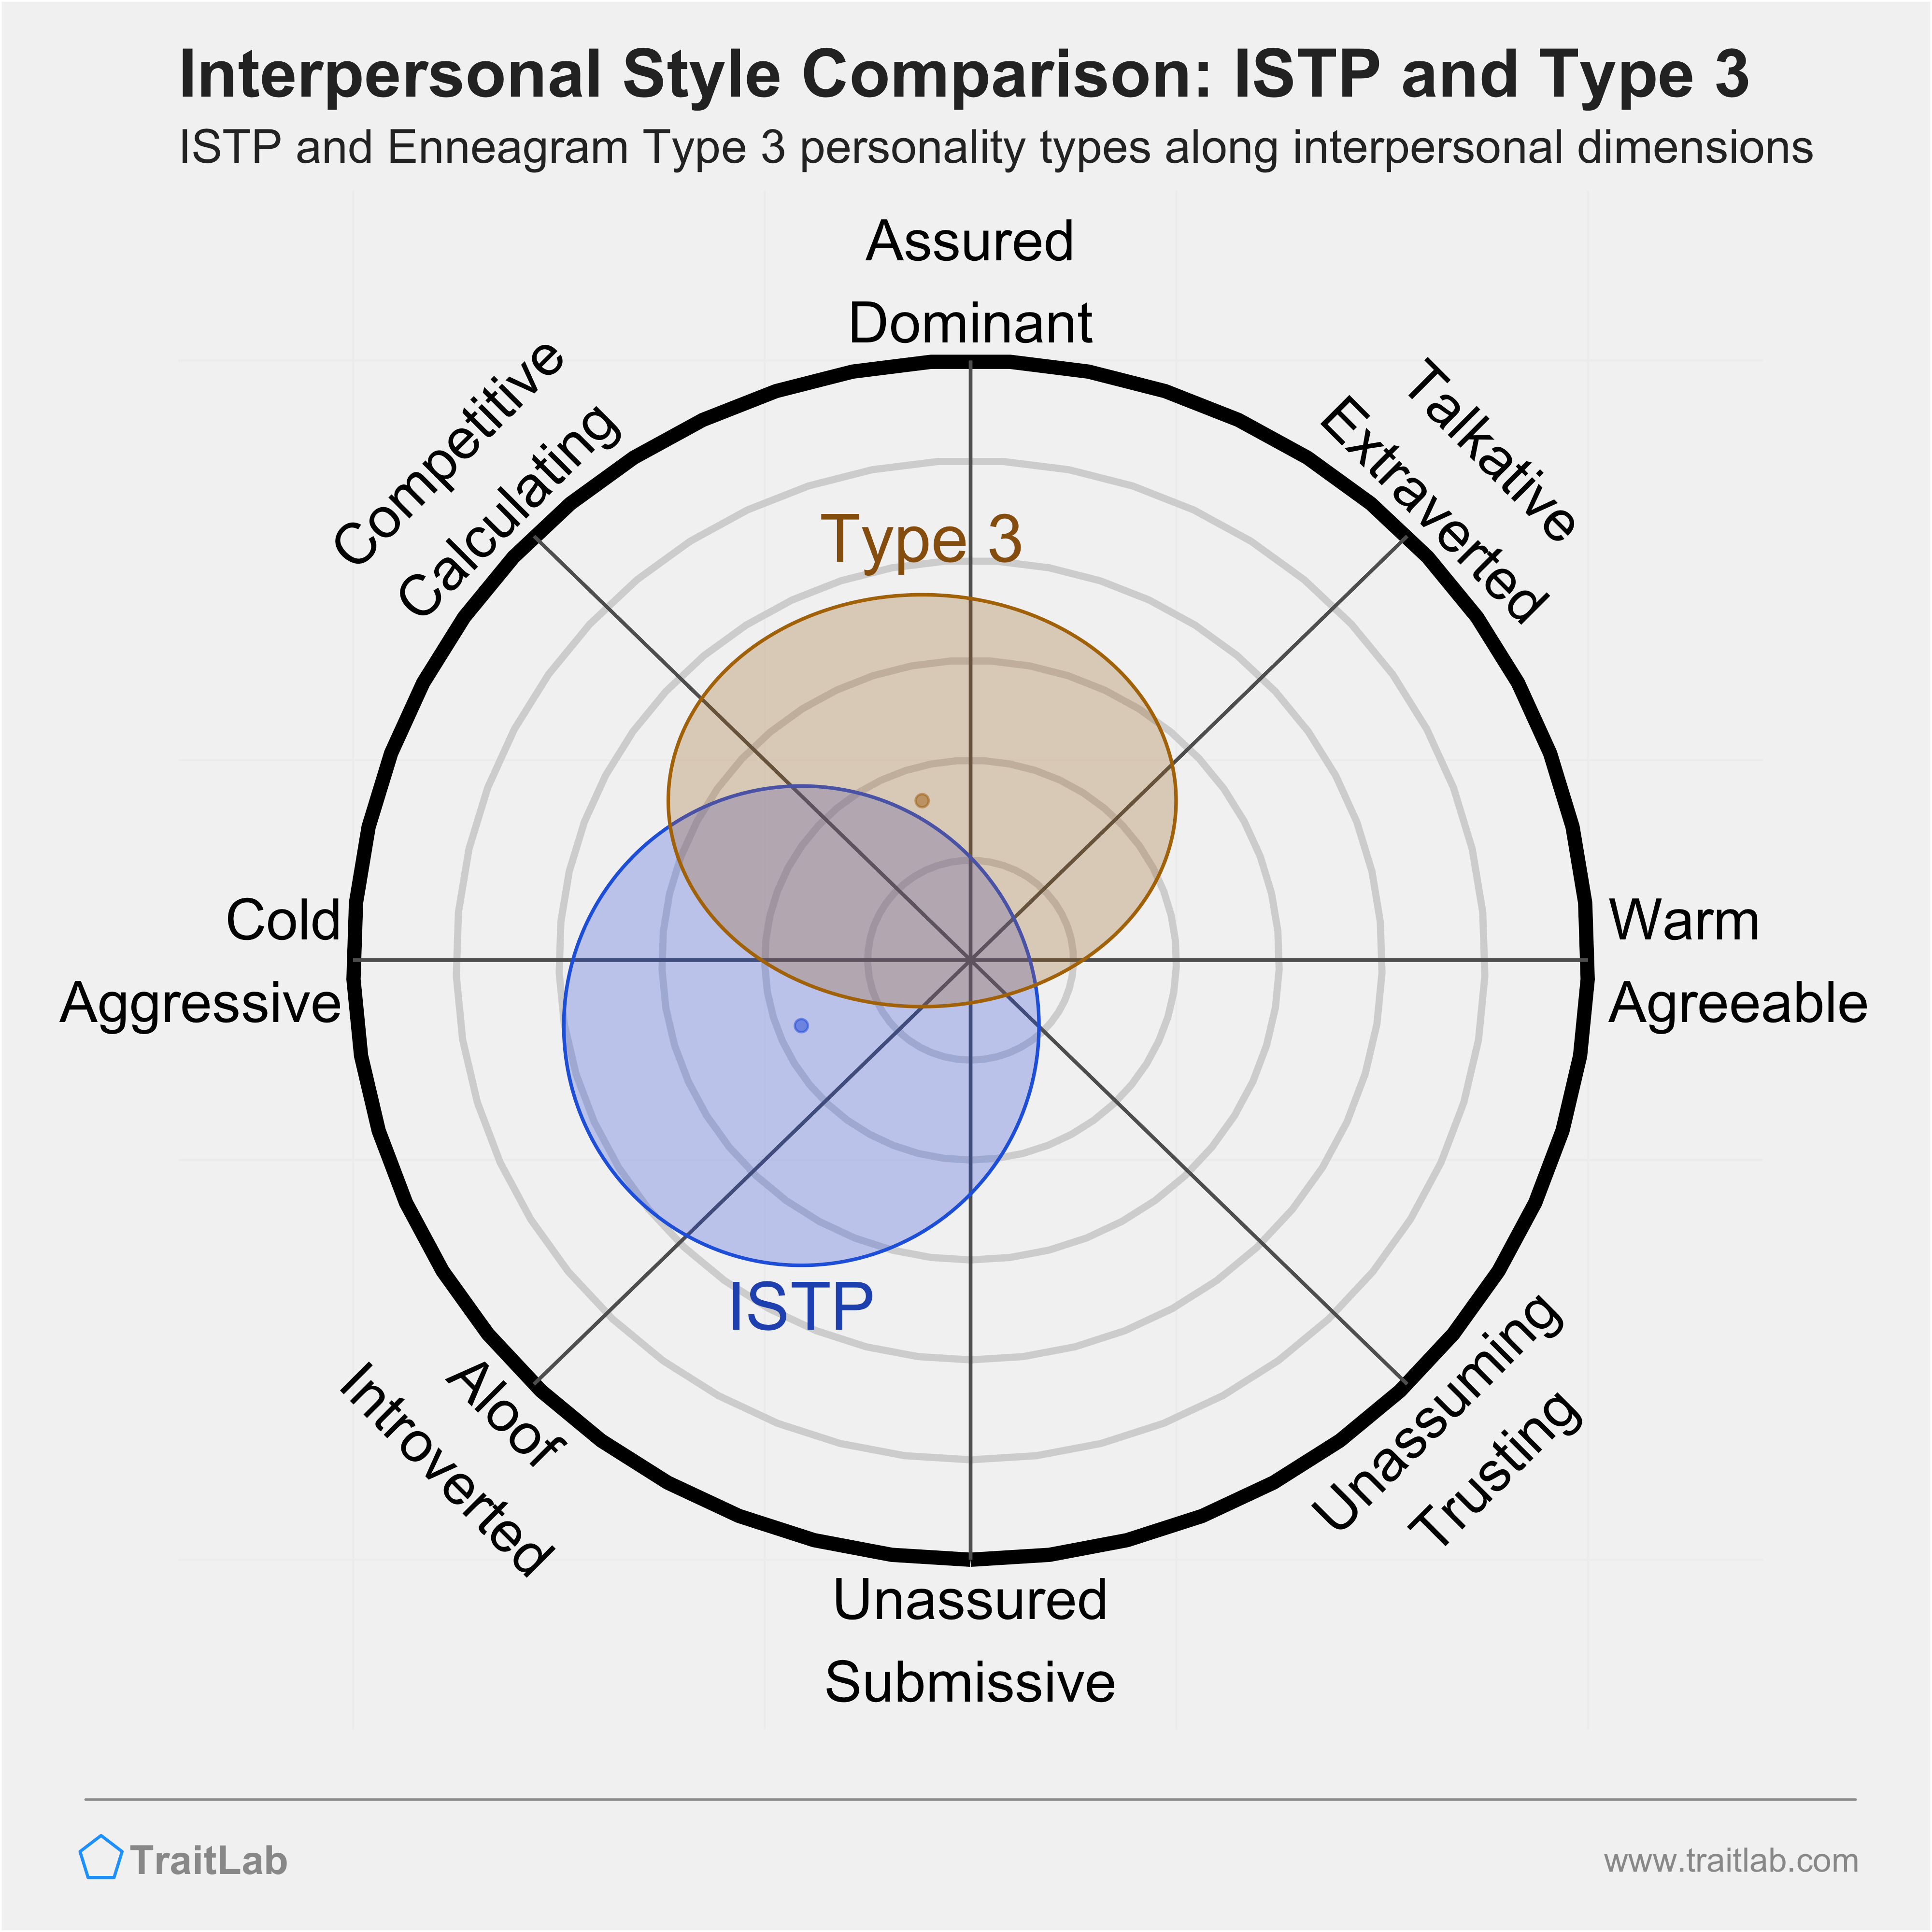 Enneagram ISTP and Type 3 comparison across interpersonal dimensions